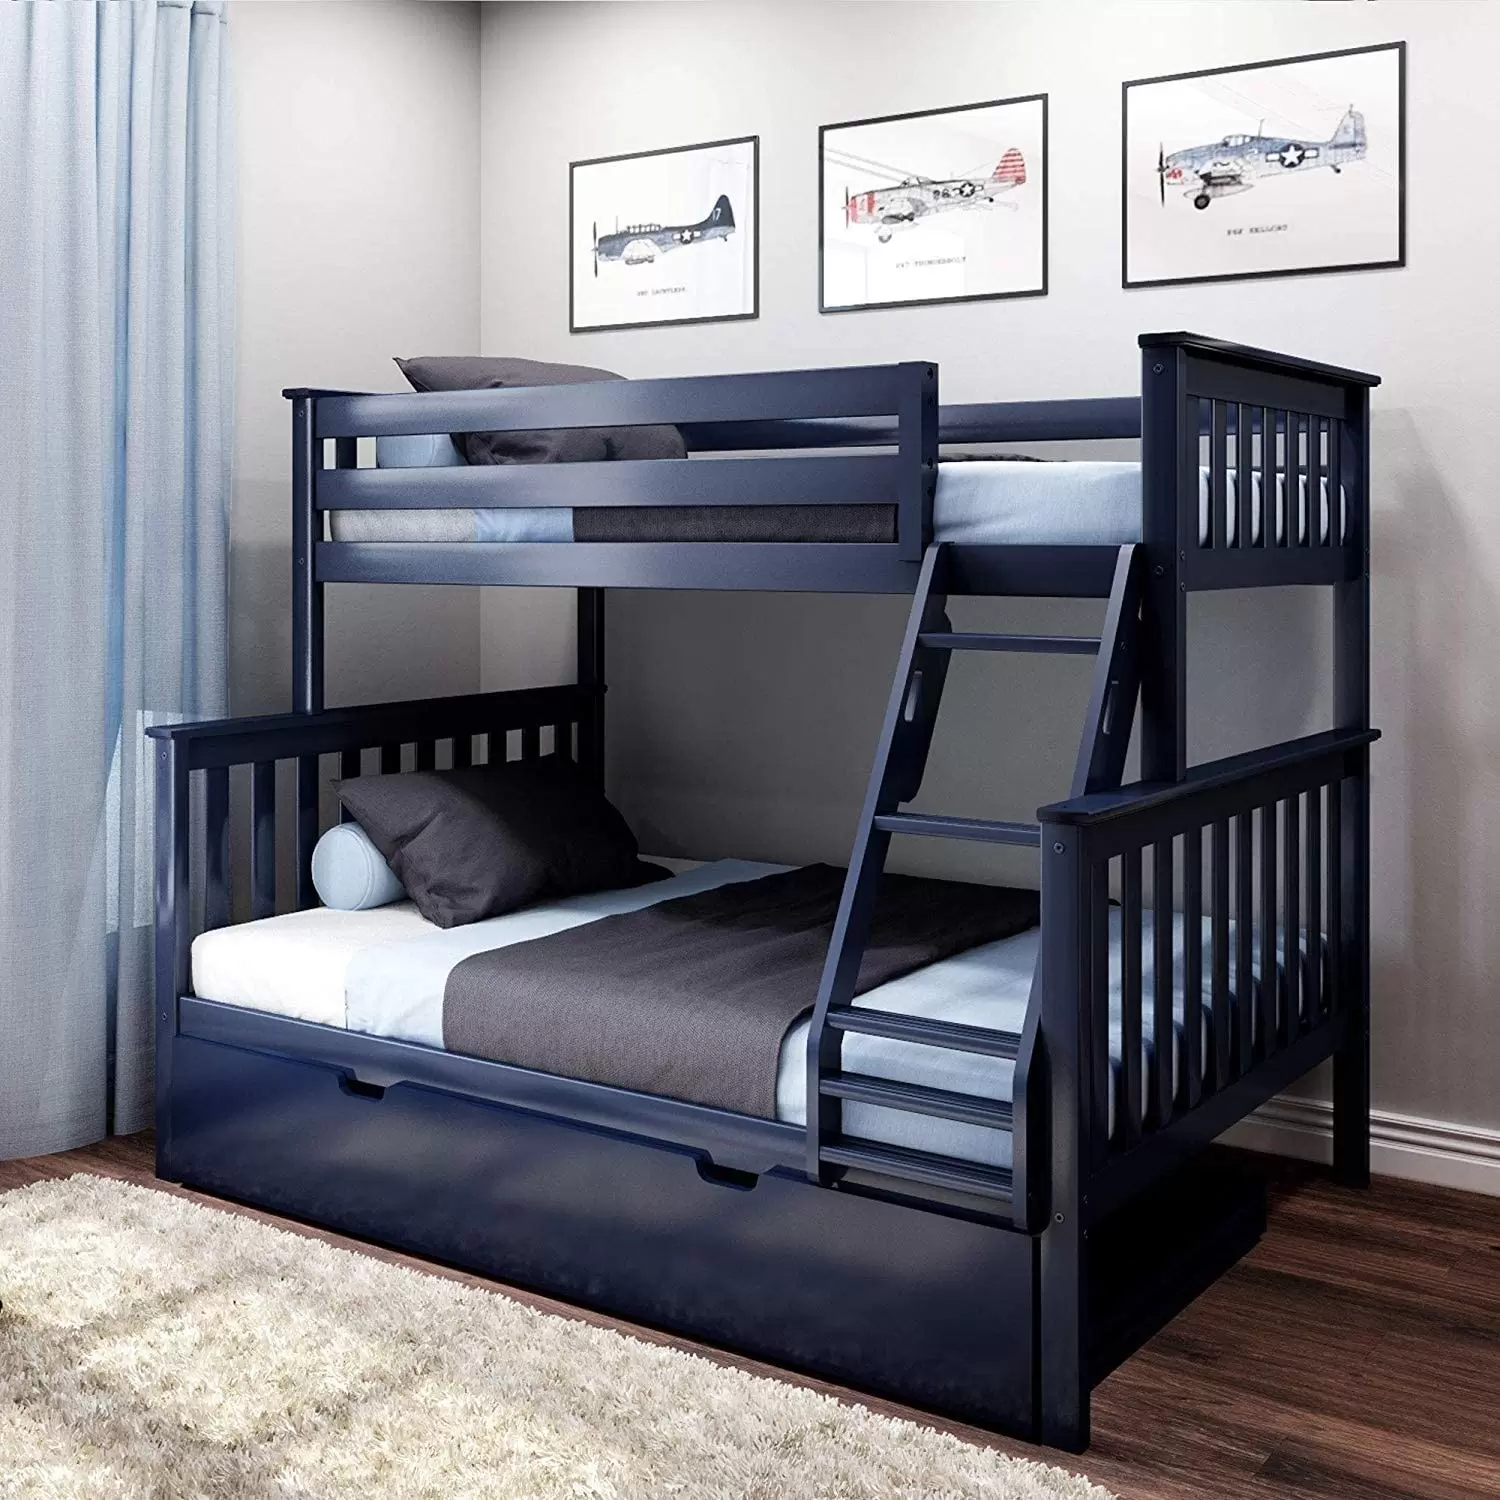 MAX & LILY SOLID WOOD TWIN OVER FULL BUNK BED IN BLUE WITH TRUNDLE BED